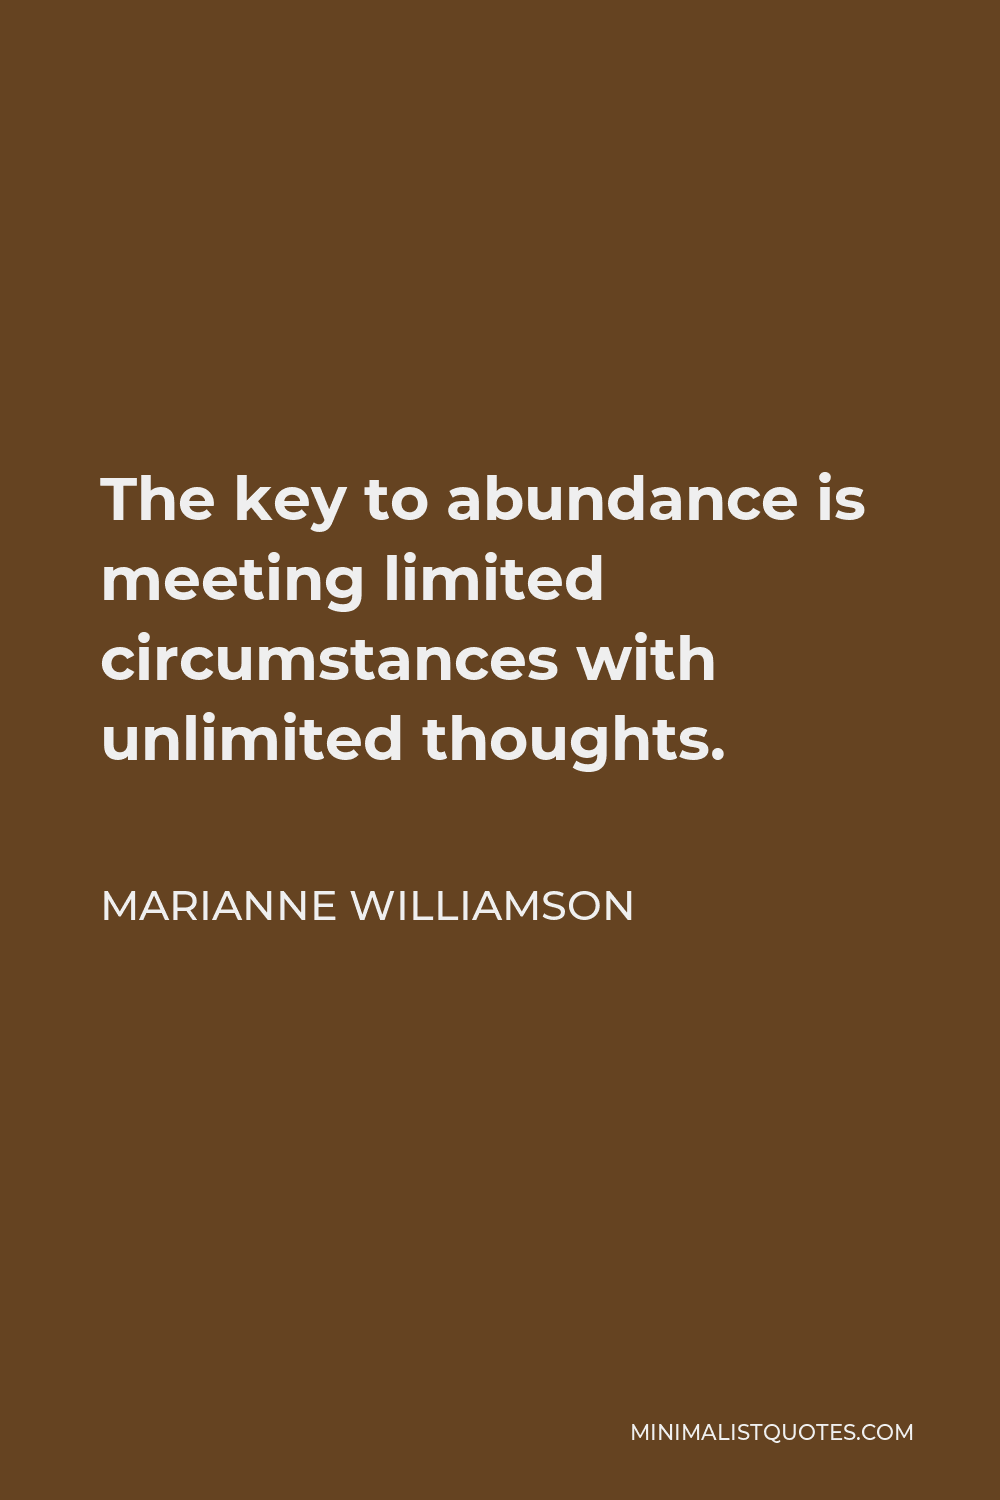 Marianne Williamson Quote - The key to abundance is meeting limited circumstances with unlimited thoughts.